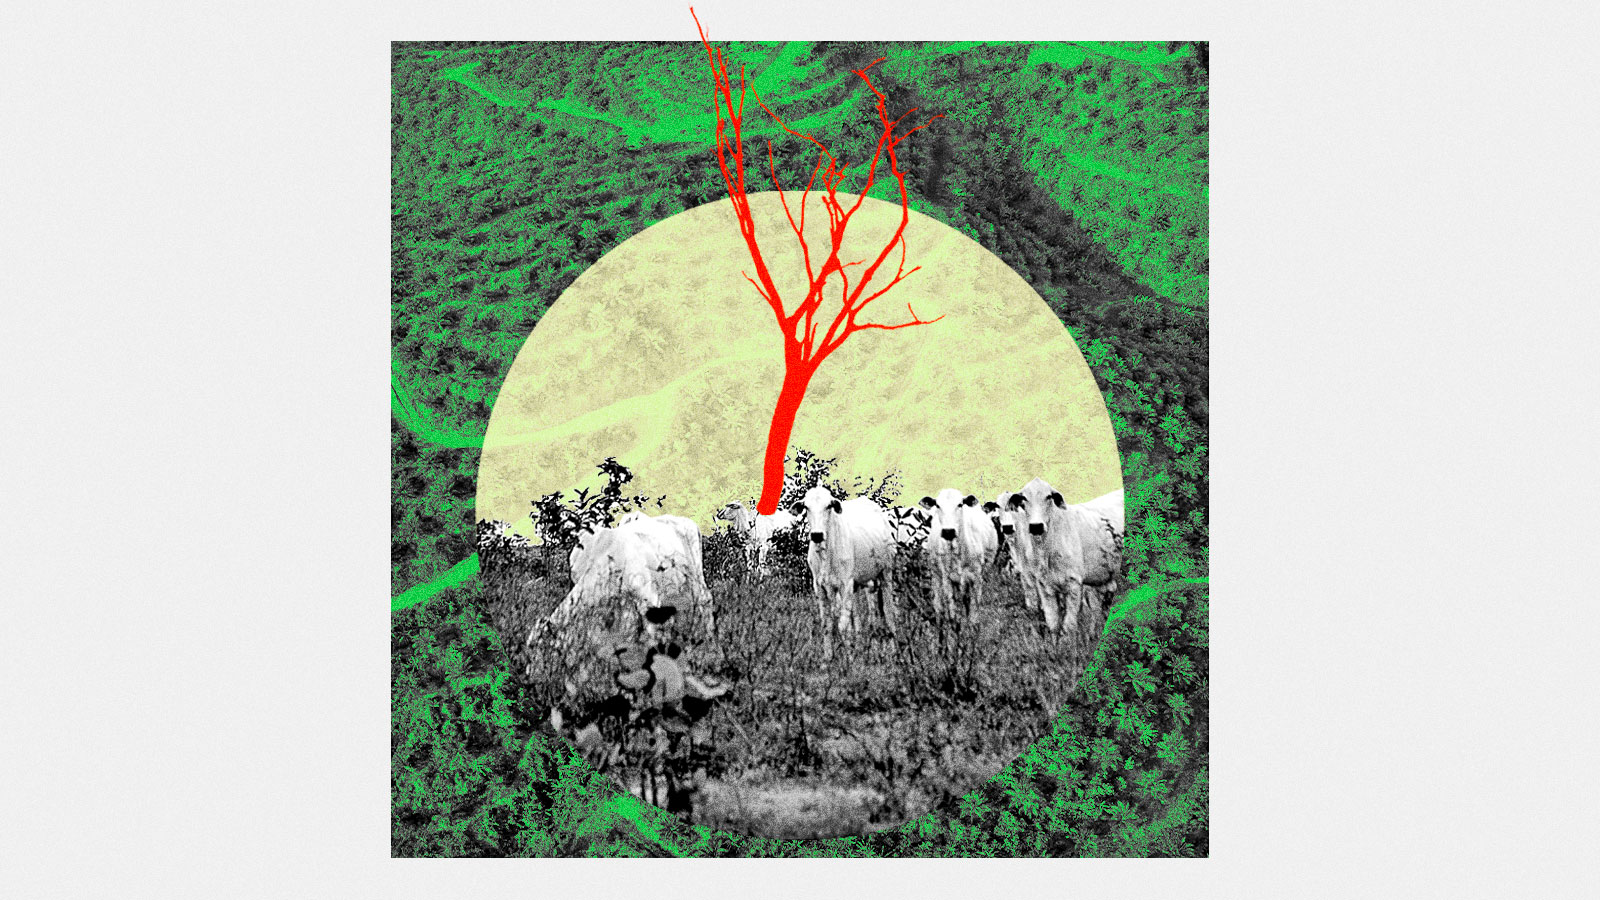 A photo collage of a palm oil plantation with a circular image of Brazilian cattle grazing on a deforested field.